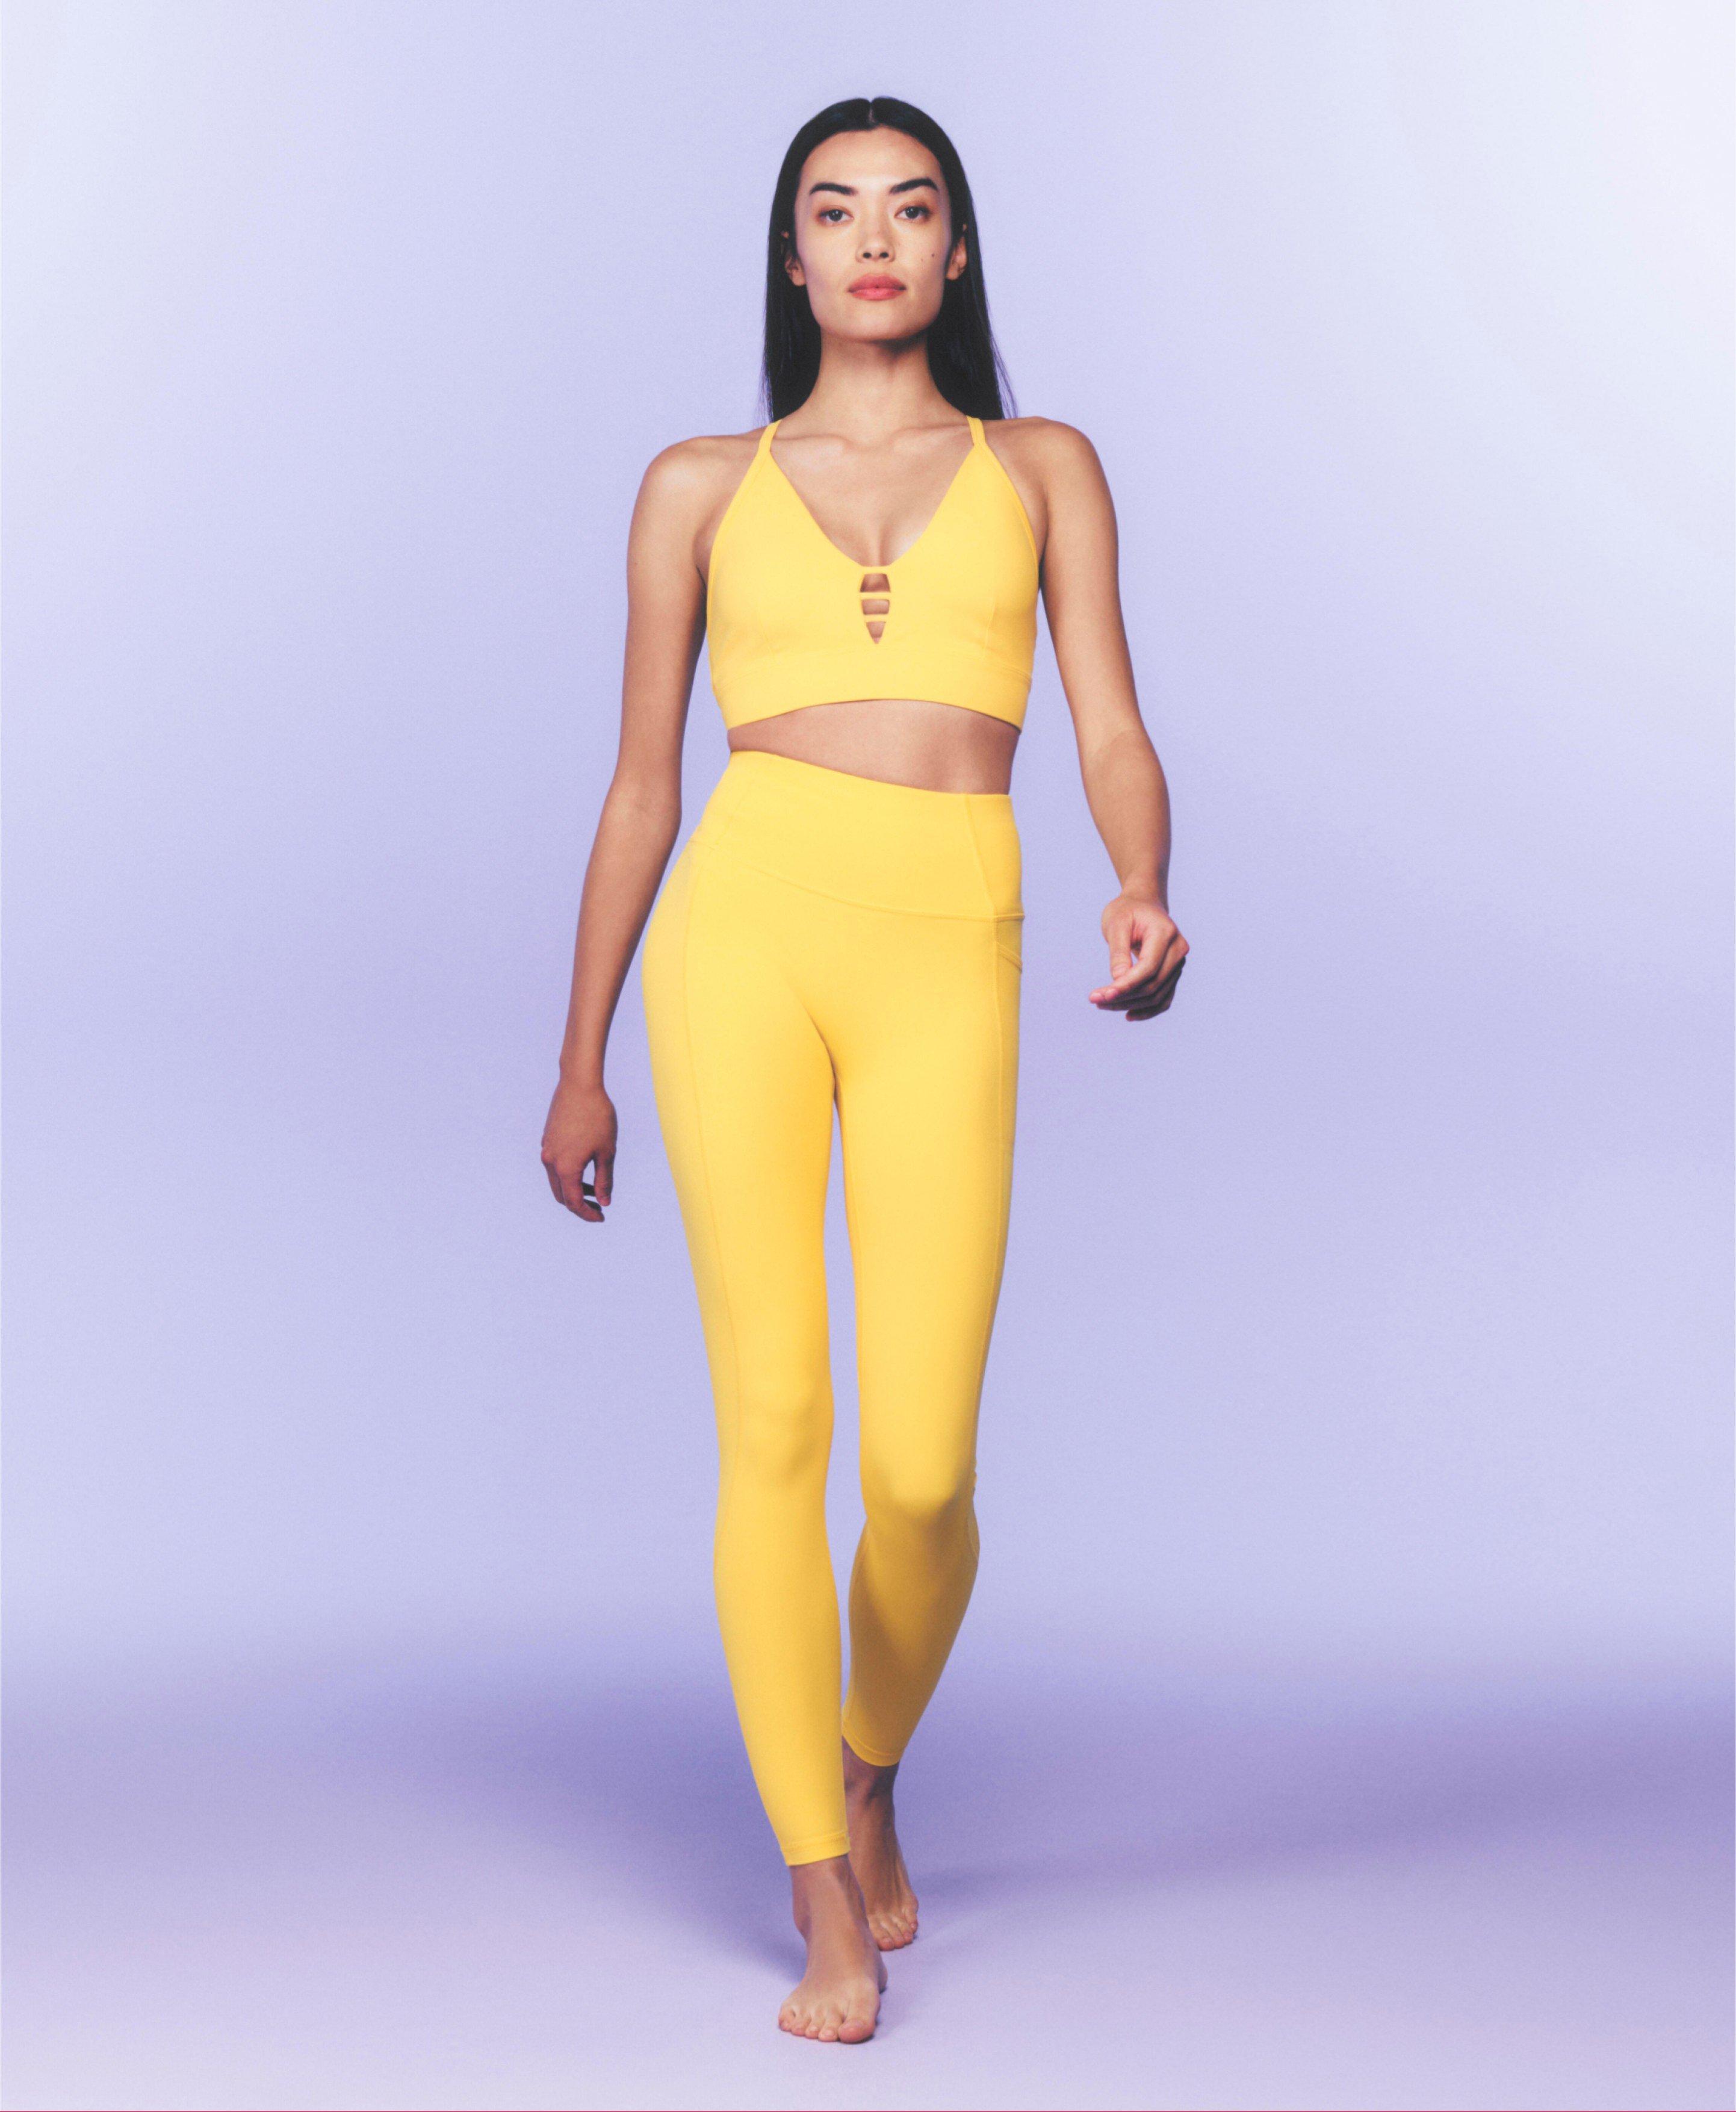 Lemon Yellow - solid color Leggings by Make it Colorful